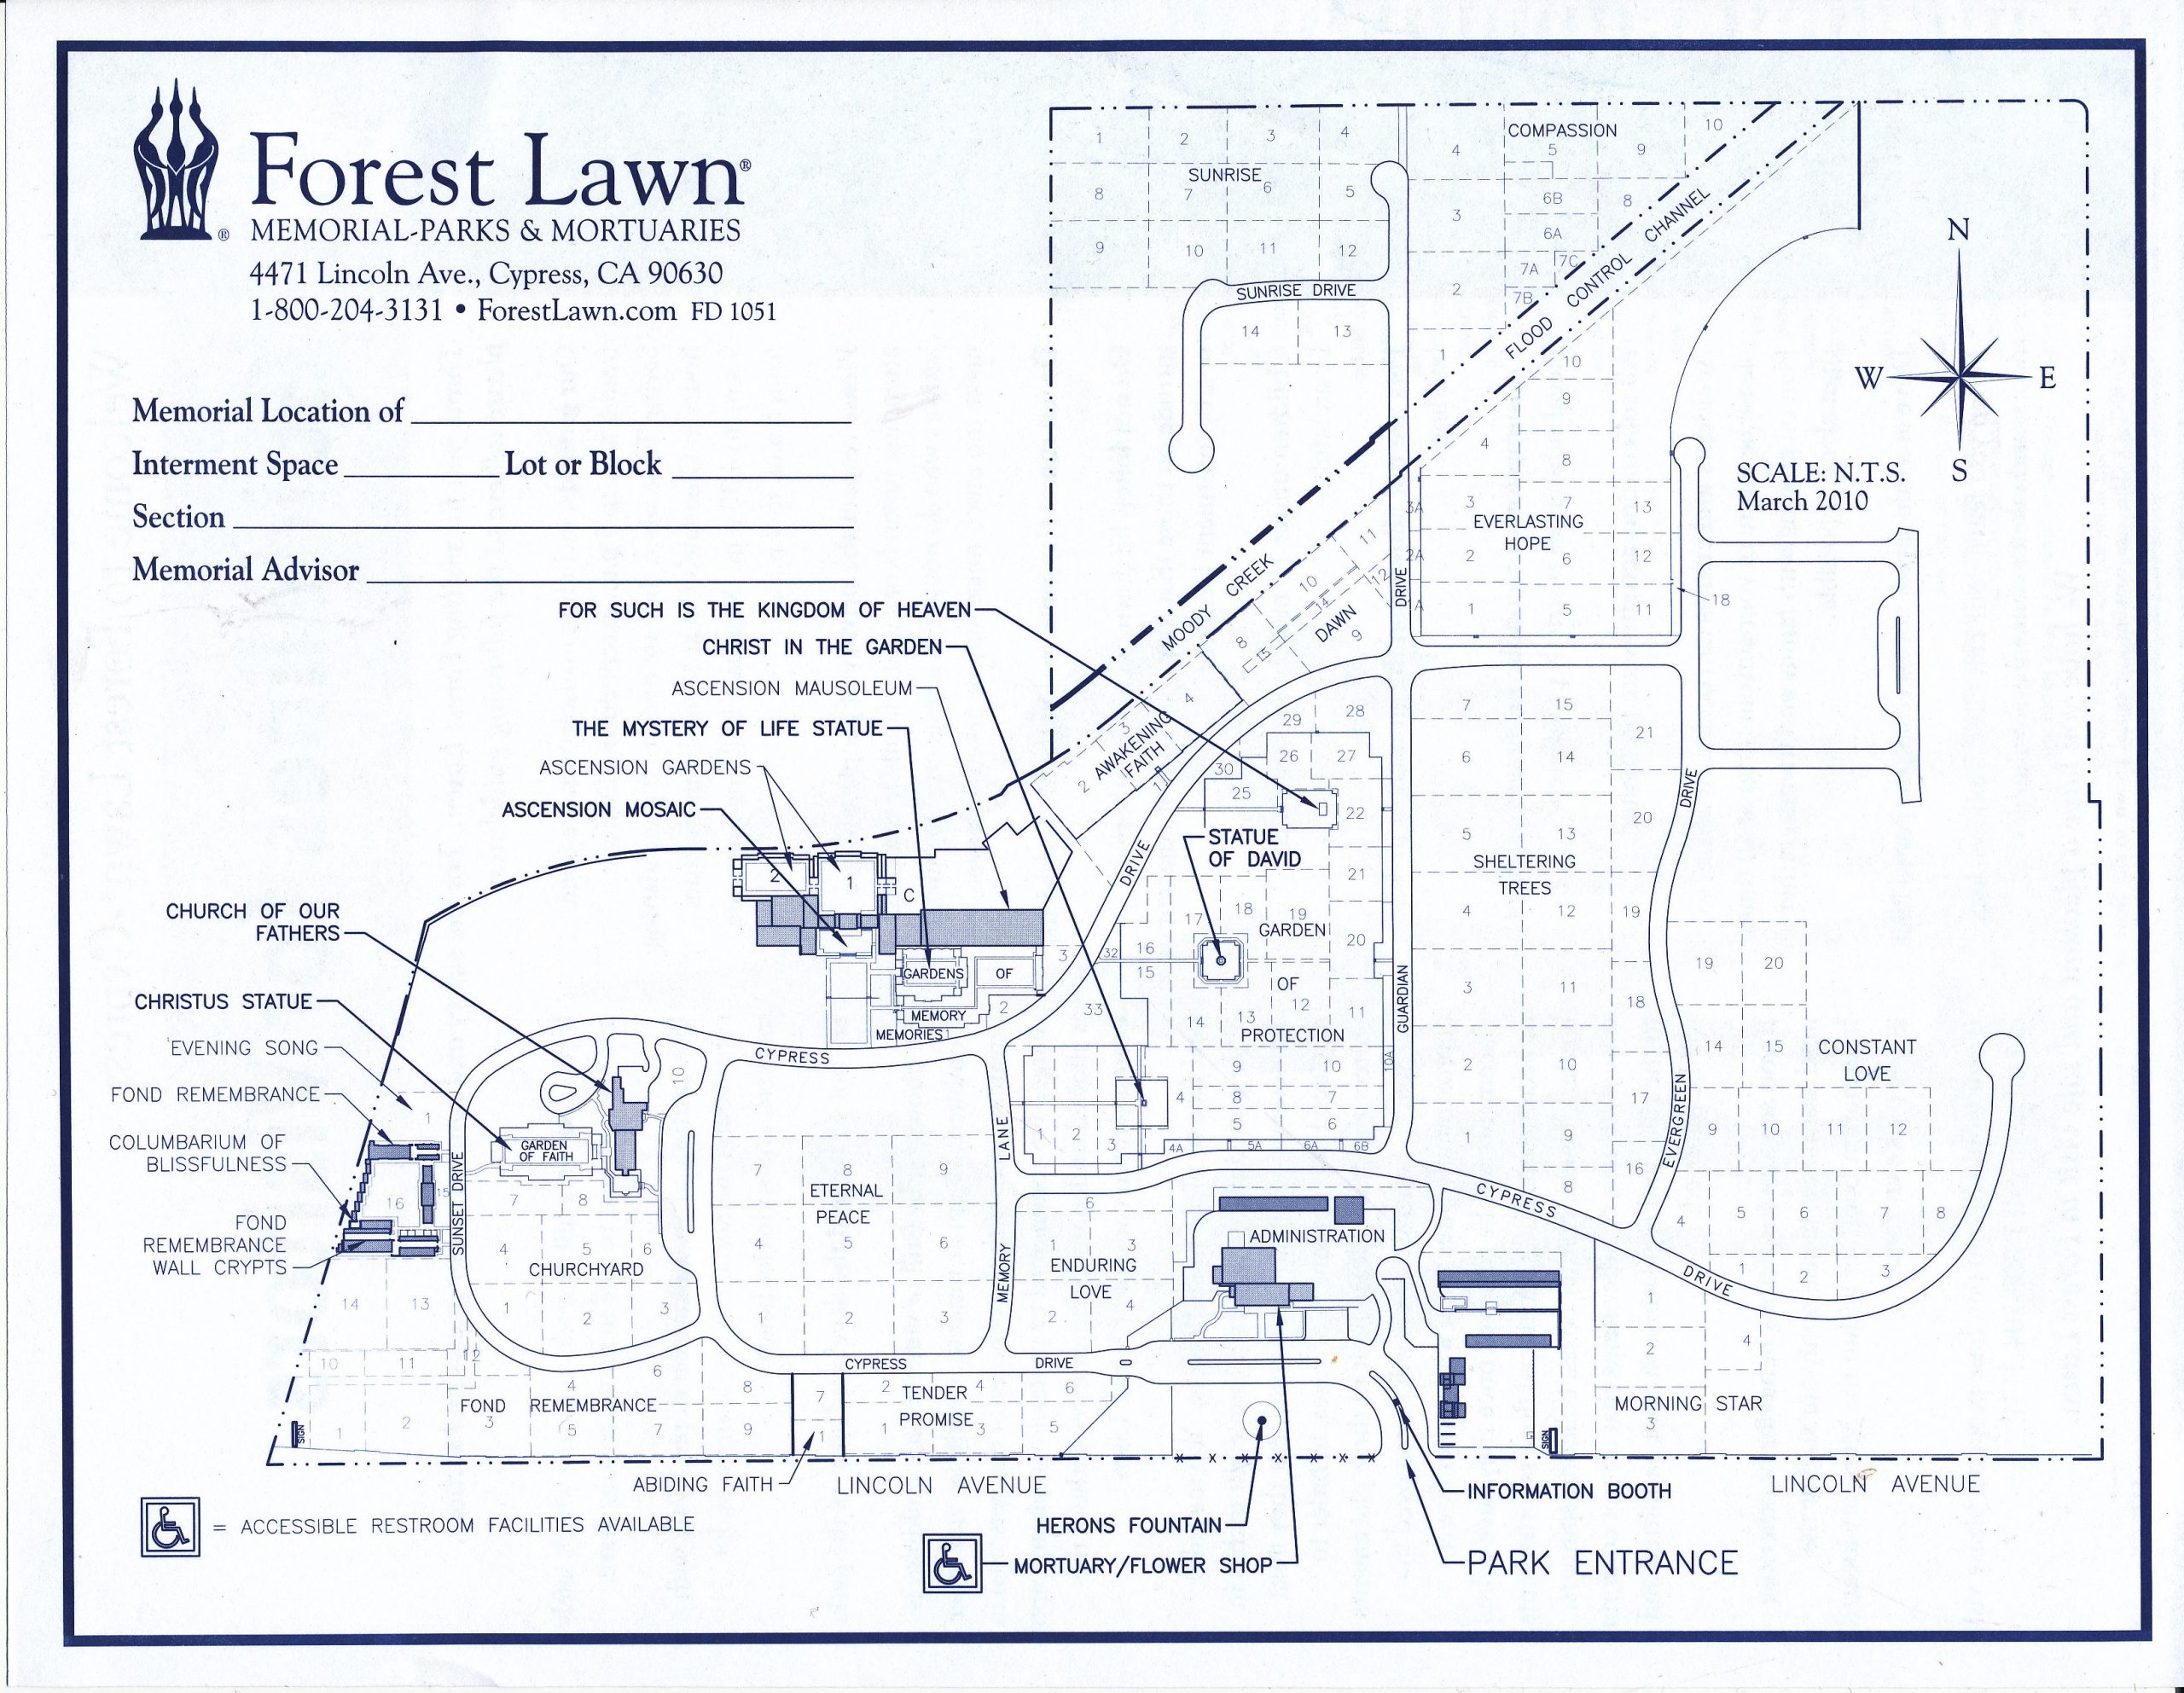 Cemetery map of Forest Lawn Memorial Park in Cypress, California